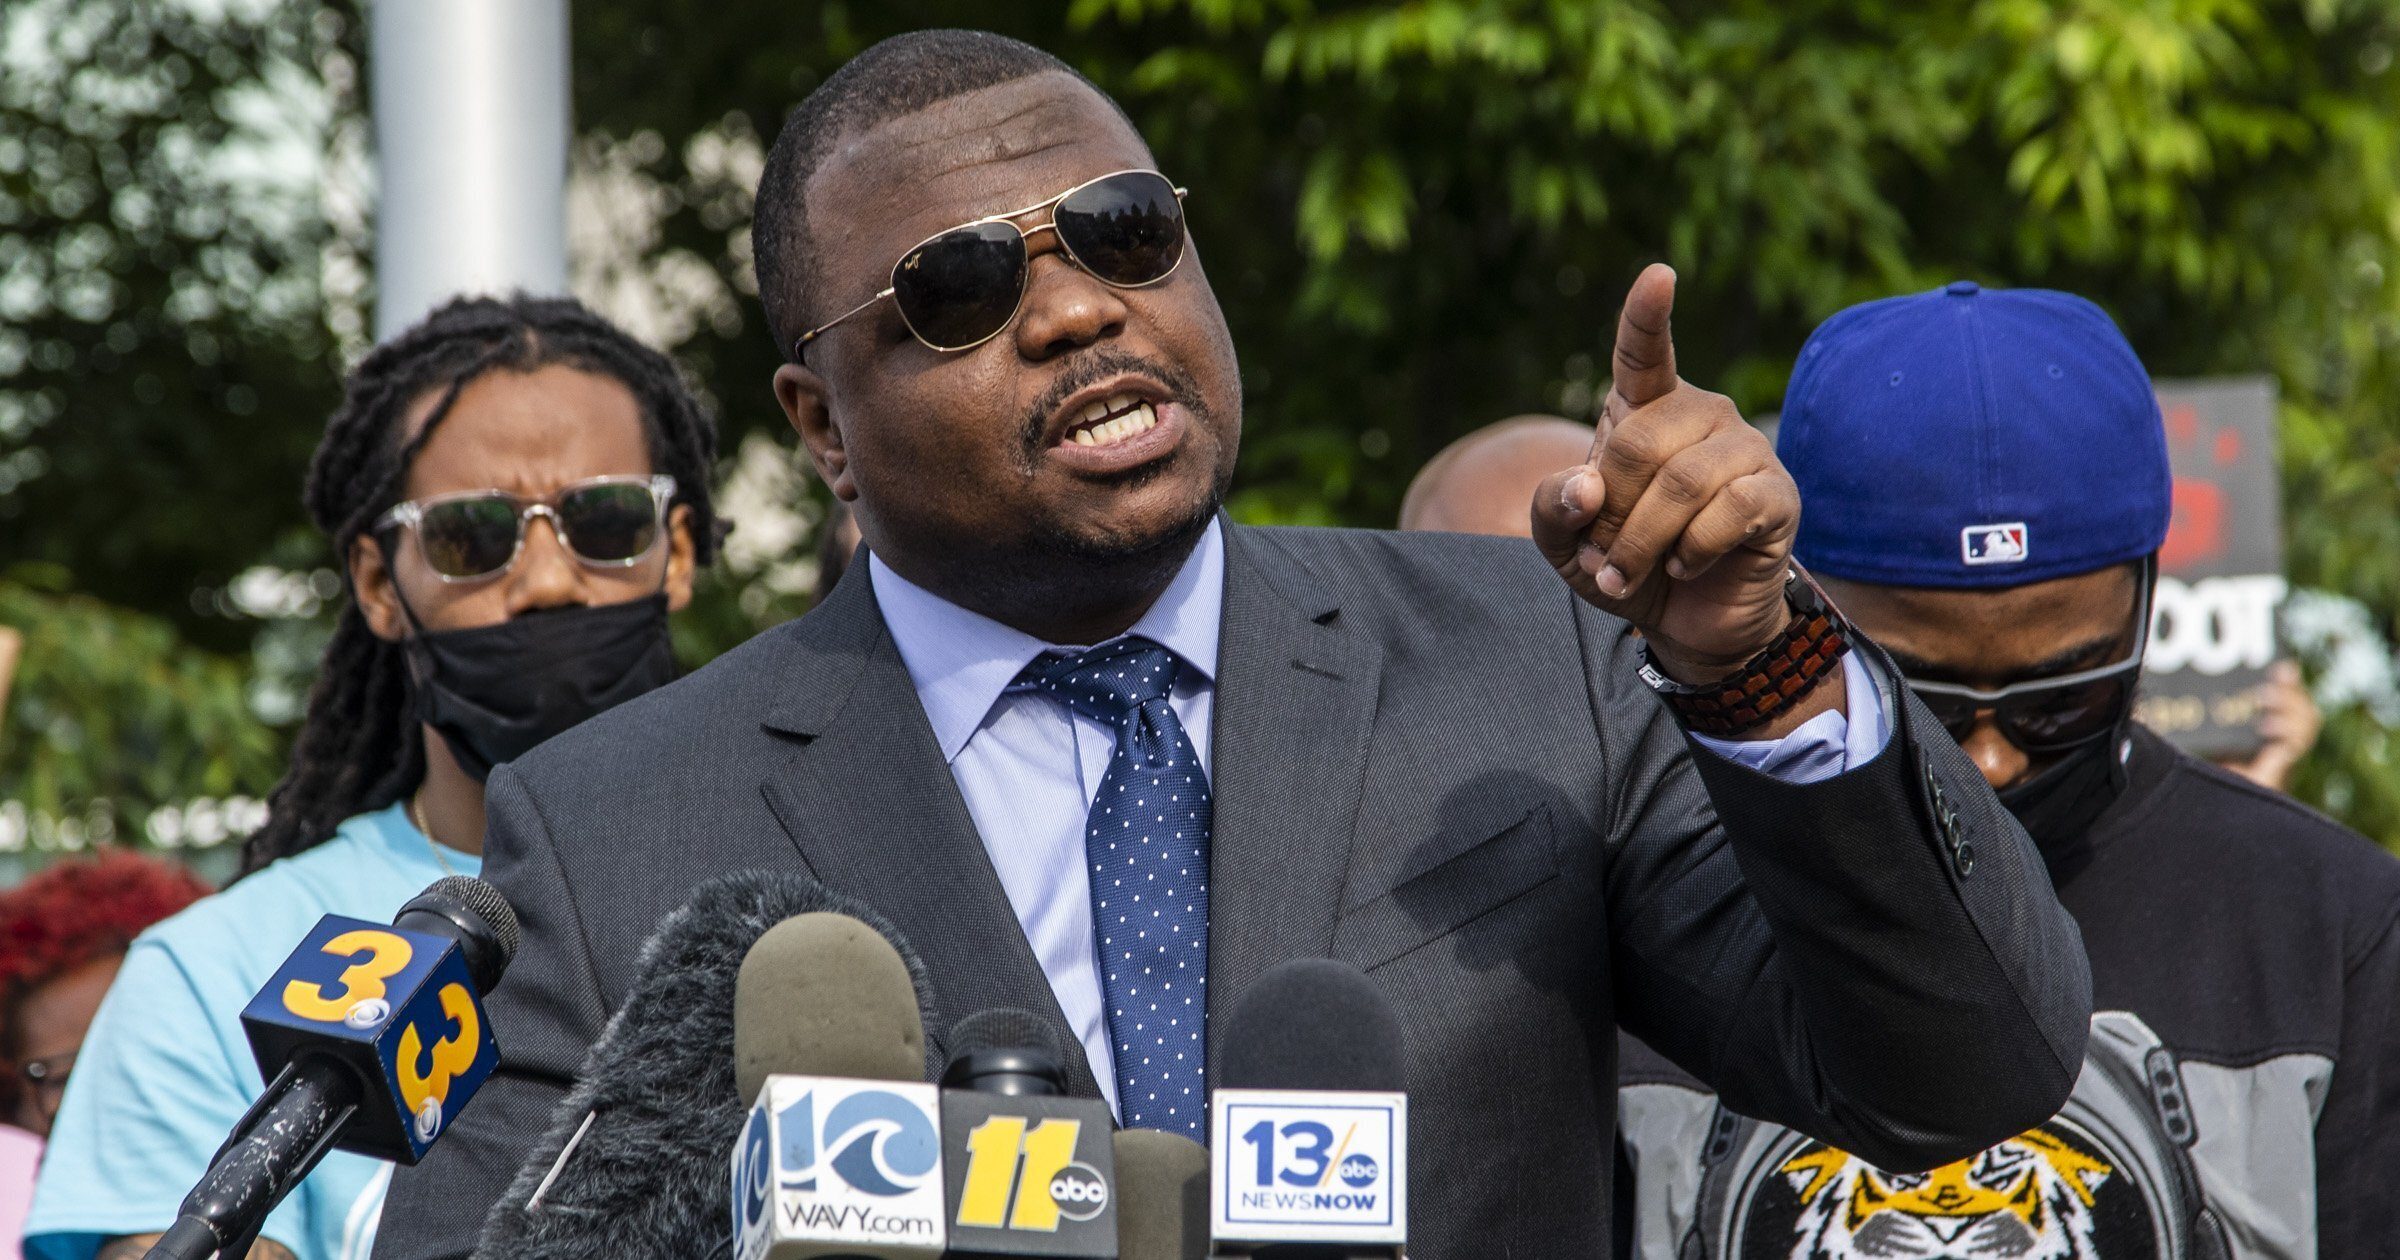 Attorney Harry Daniels speaks during a news conference in Elizabeth City, North Carolina, on May 11, 2021, after the family of Andrew Brown Jr. viewed video footage of the police shooting death of Brown in April.